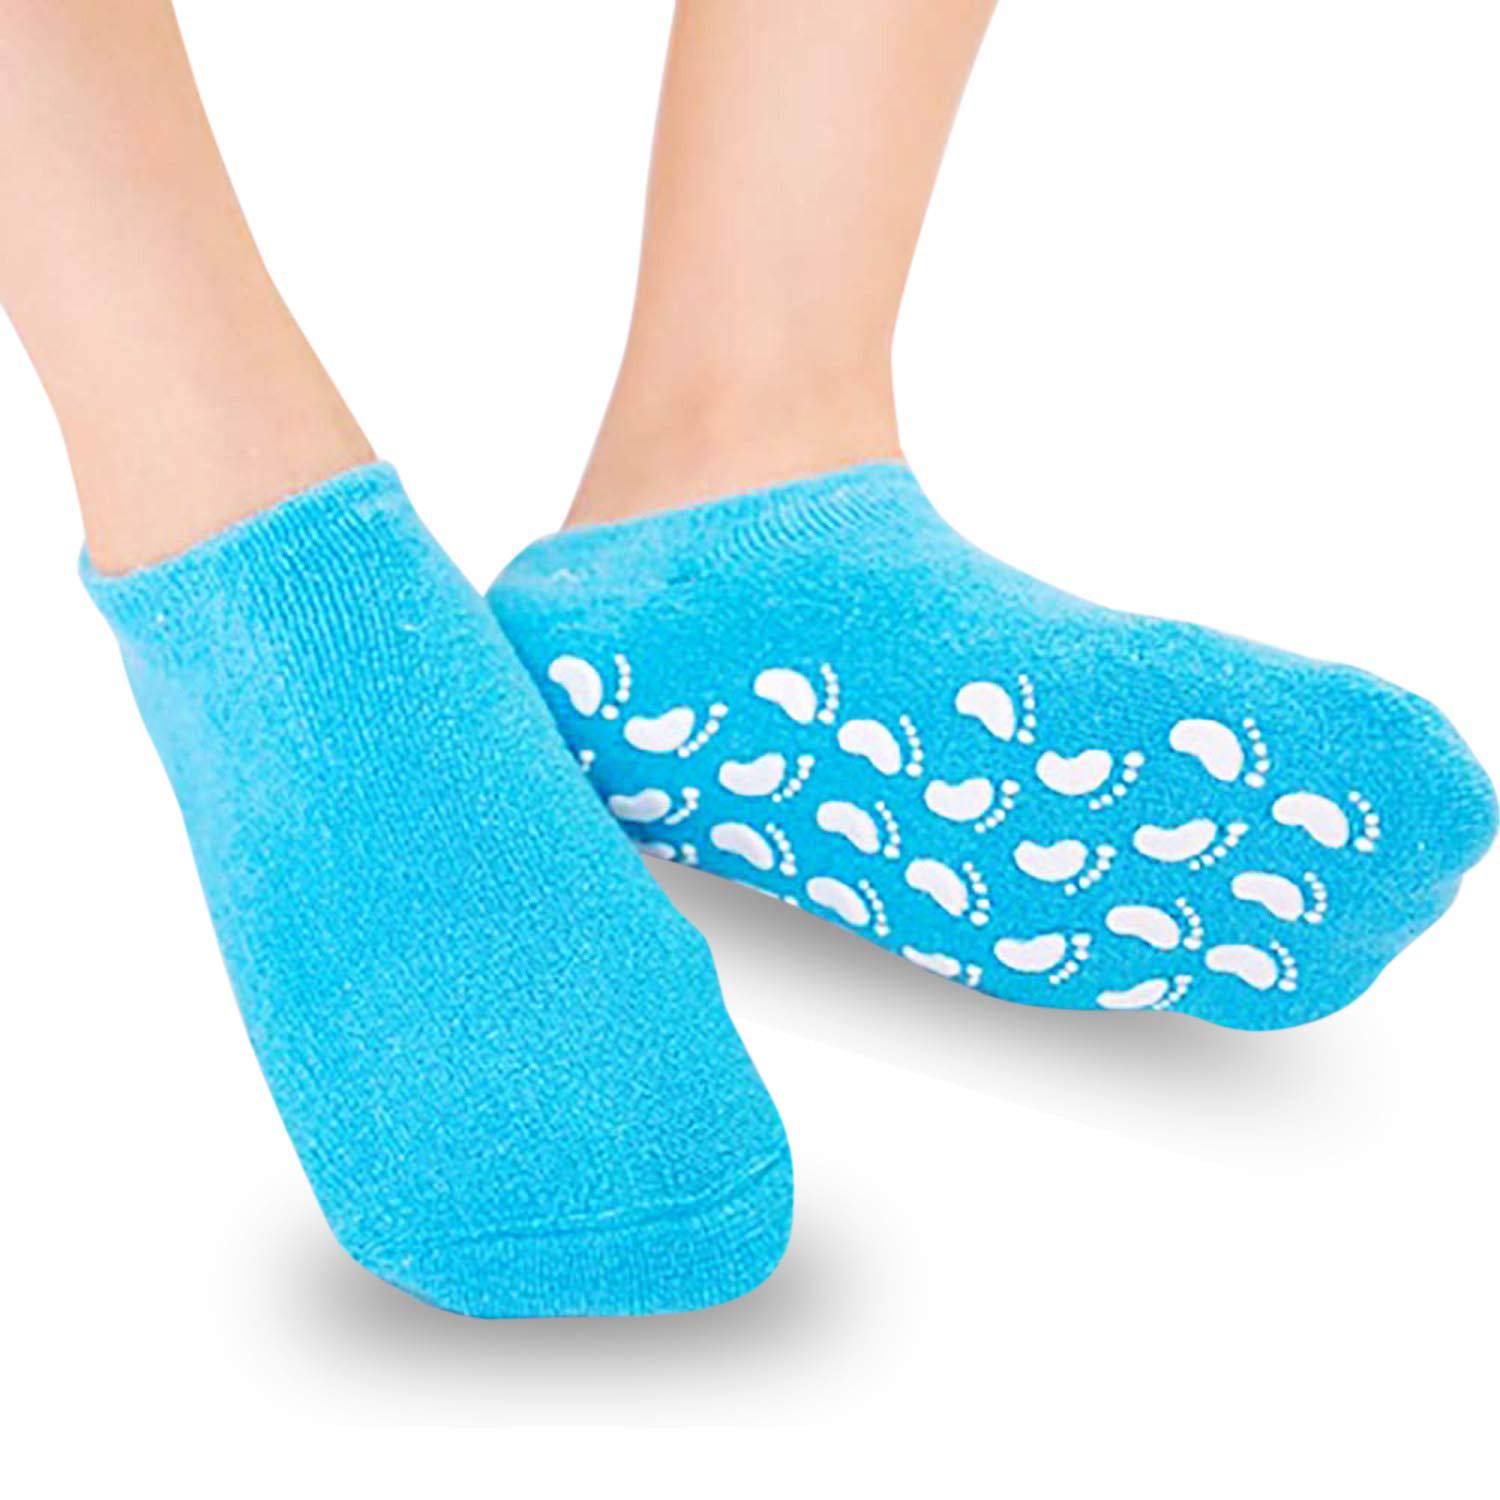 Silicone Socks for Softer, Smoother Feet - Bliss Kiss by Finely Finished,  LLC